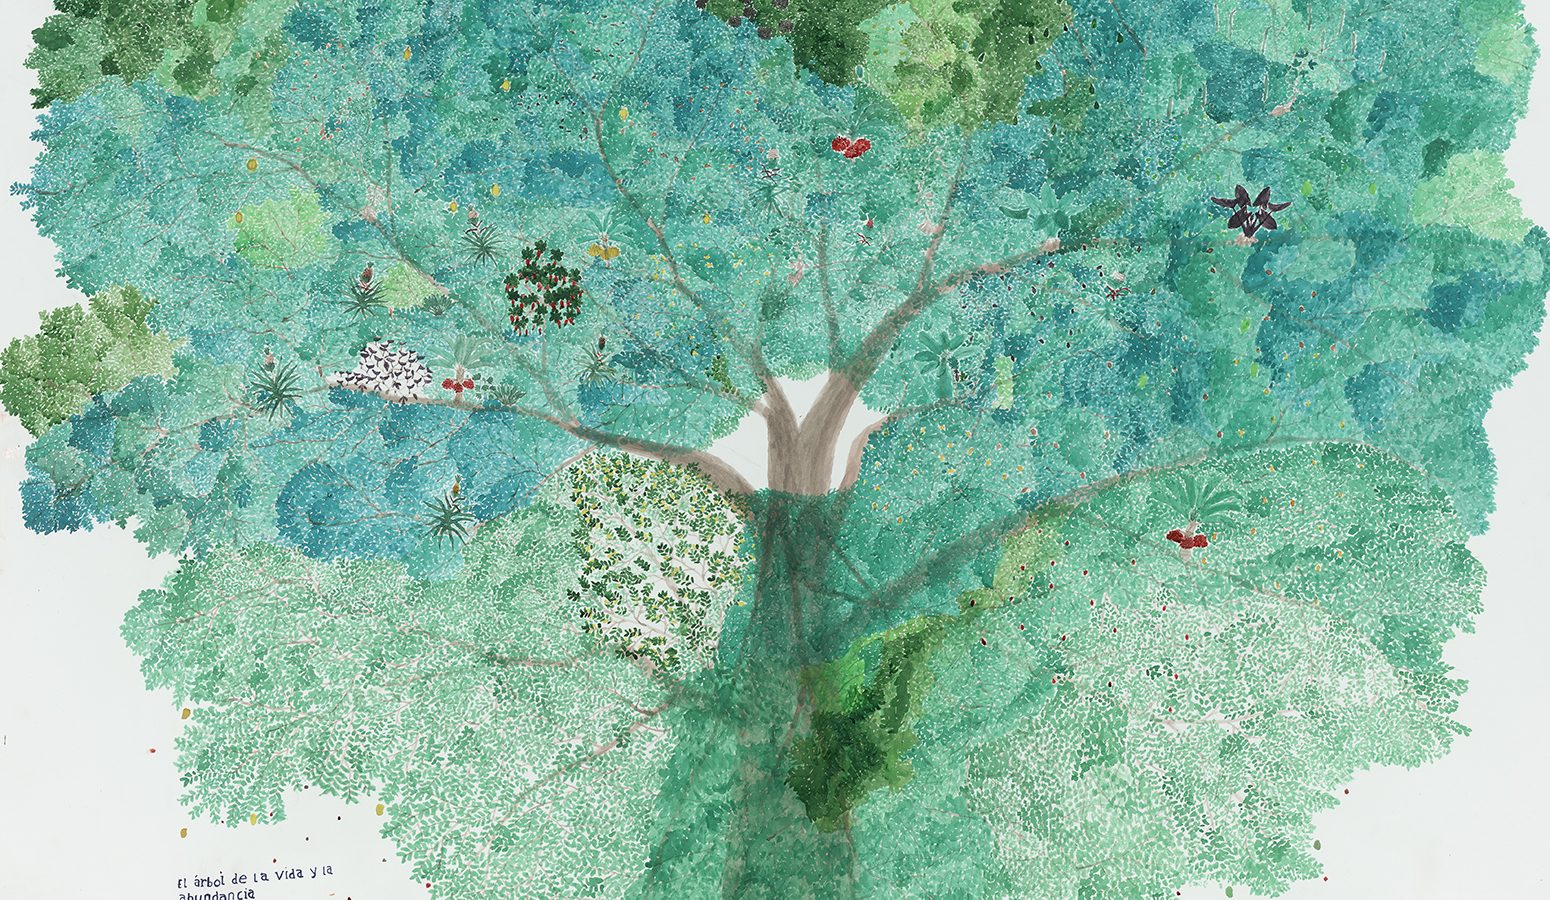 A drawing of a large tree with delicate green leaves, tiny dark birds, and red fruits